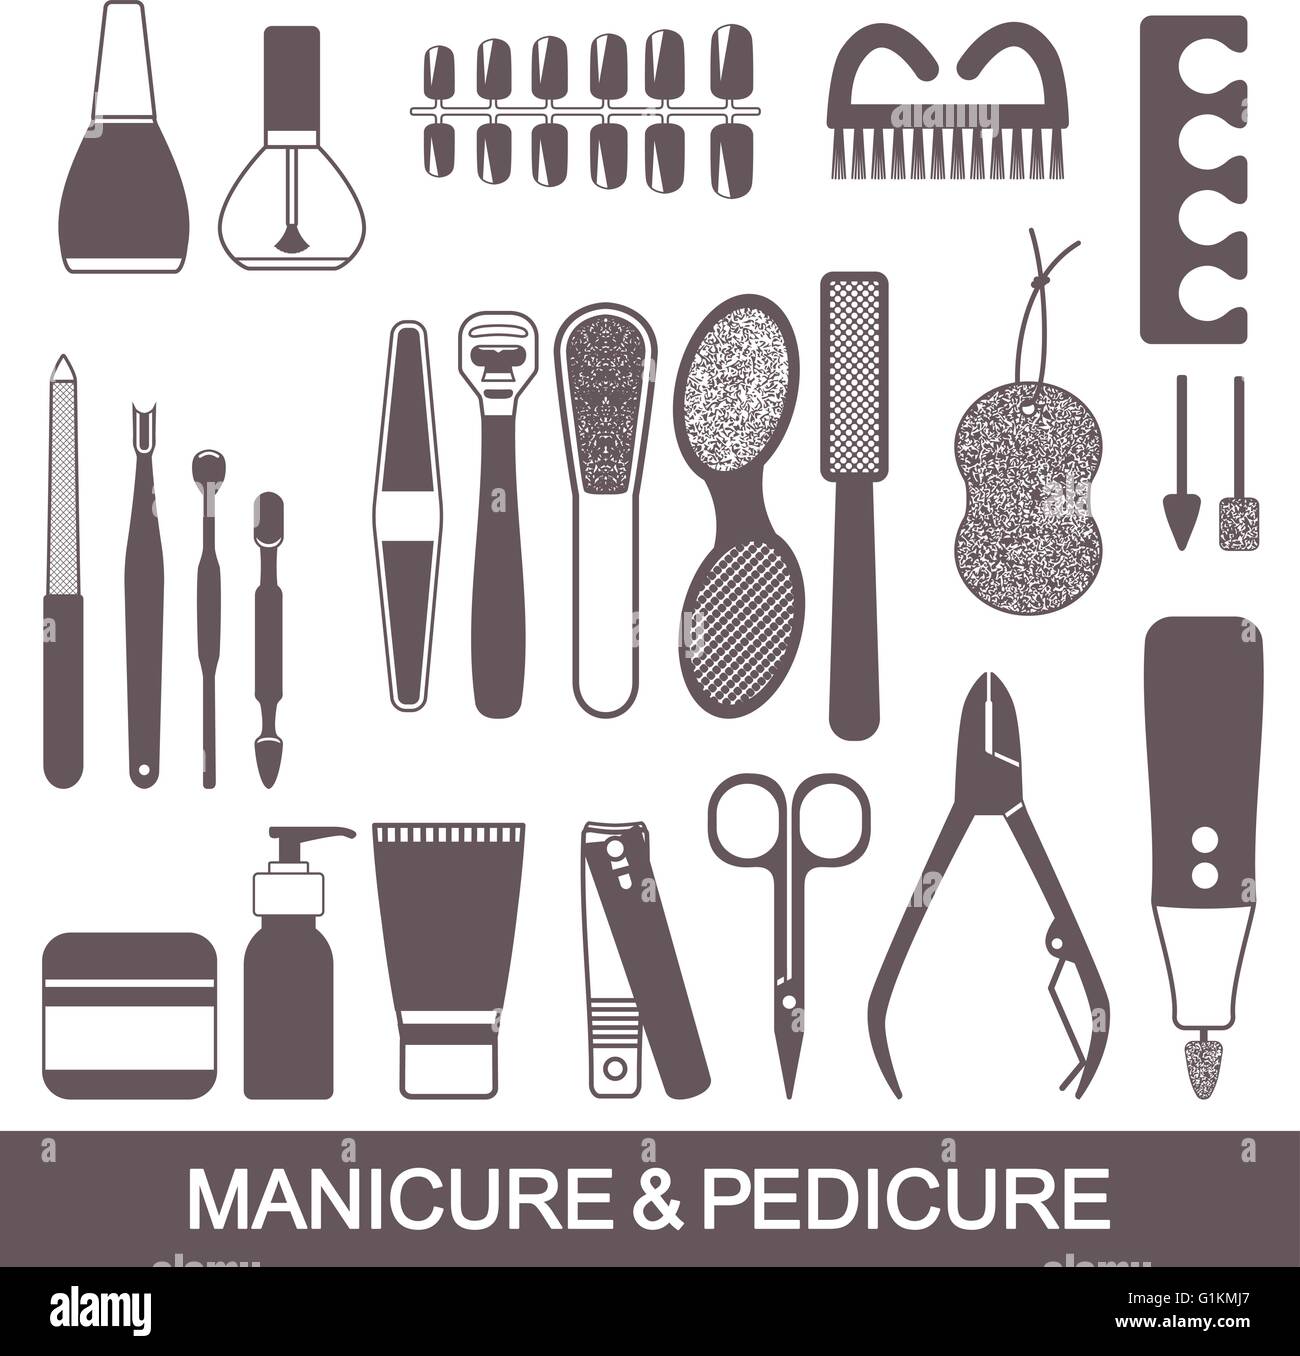 Beauty and care manicure and pedicure tools and products vector silhouette icons set Stock Vector